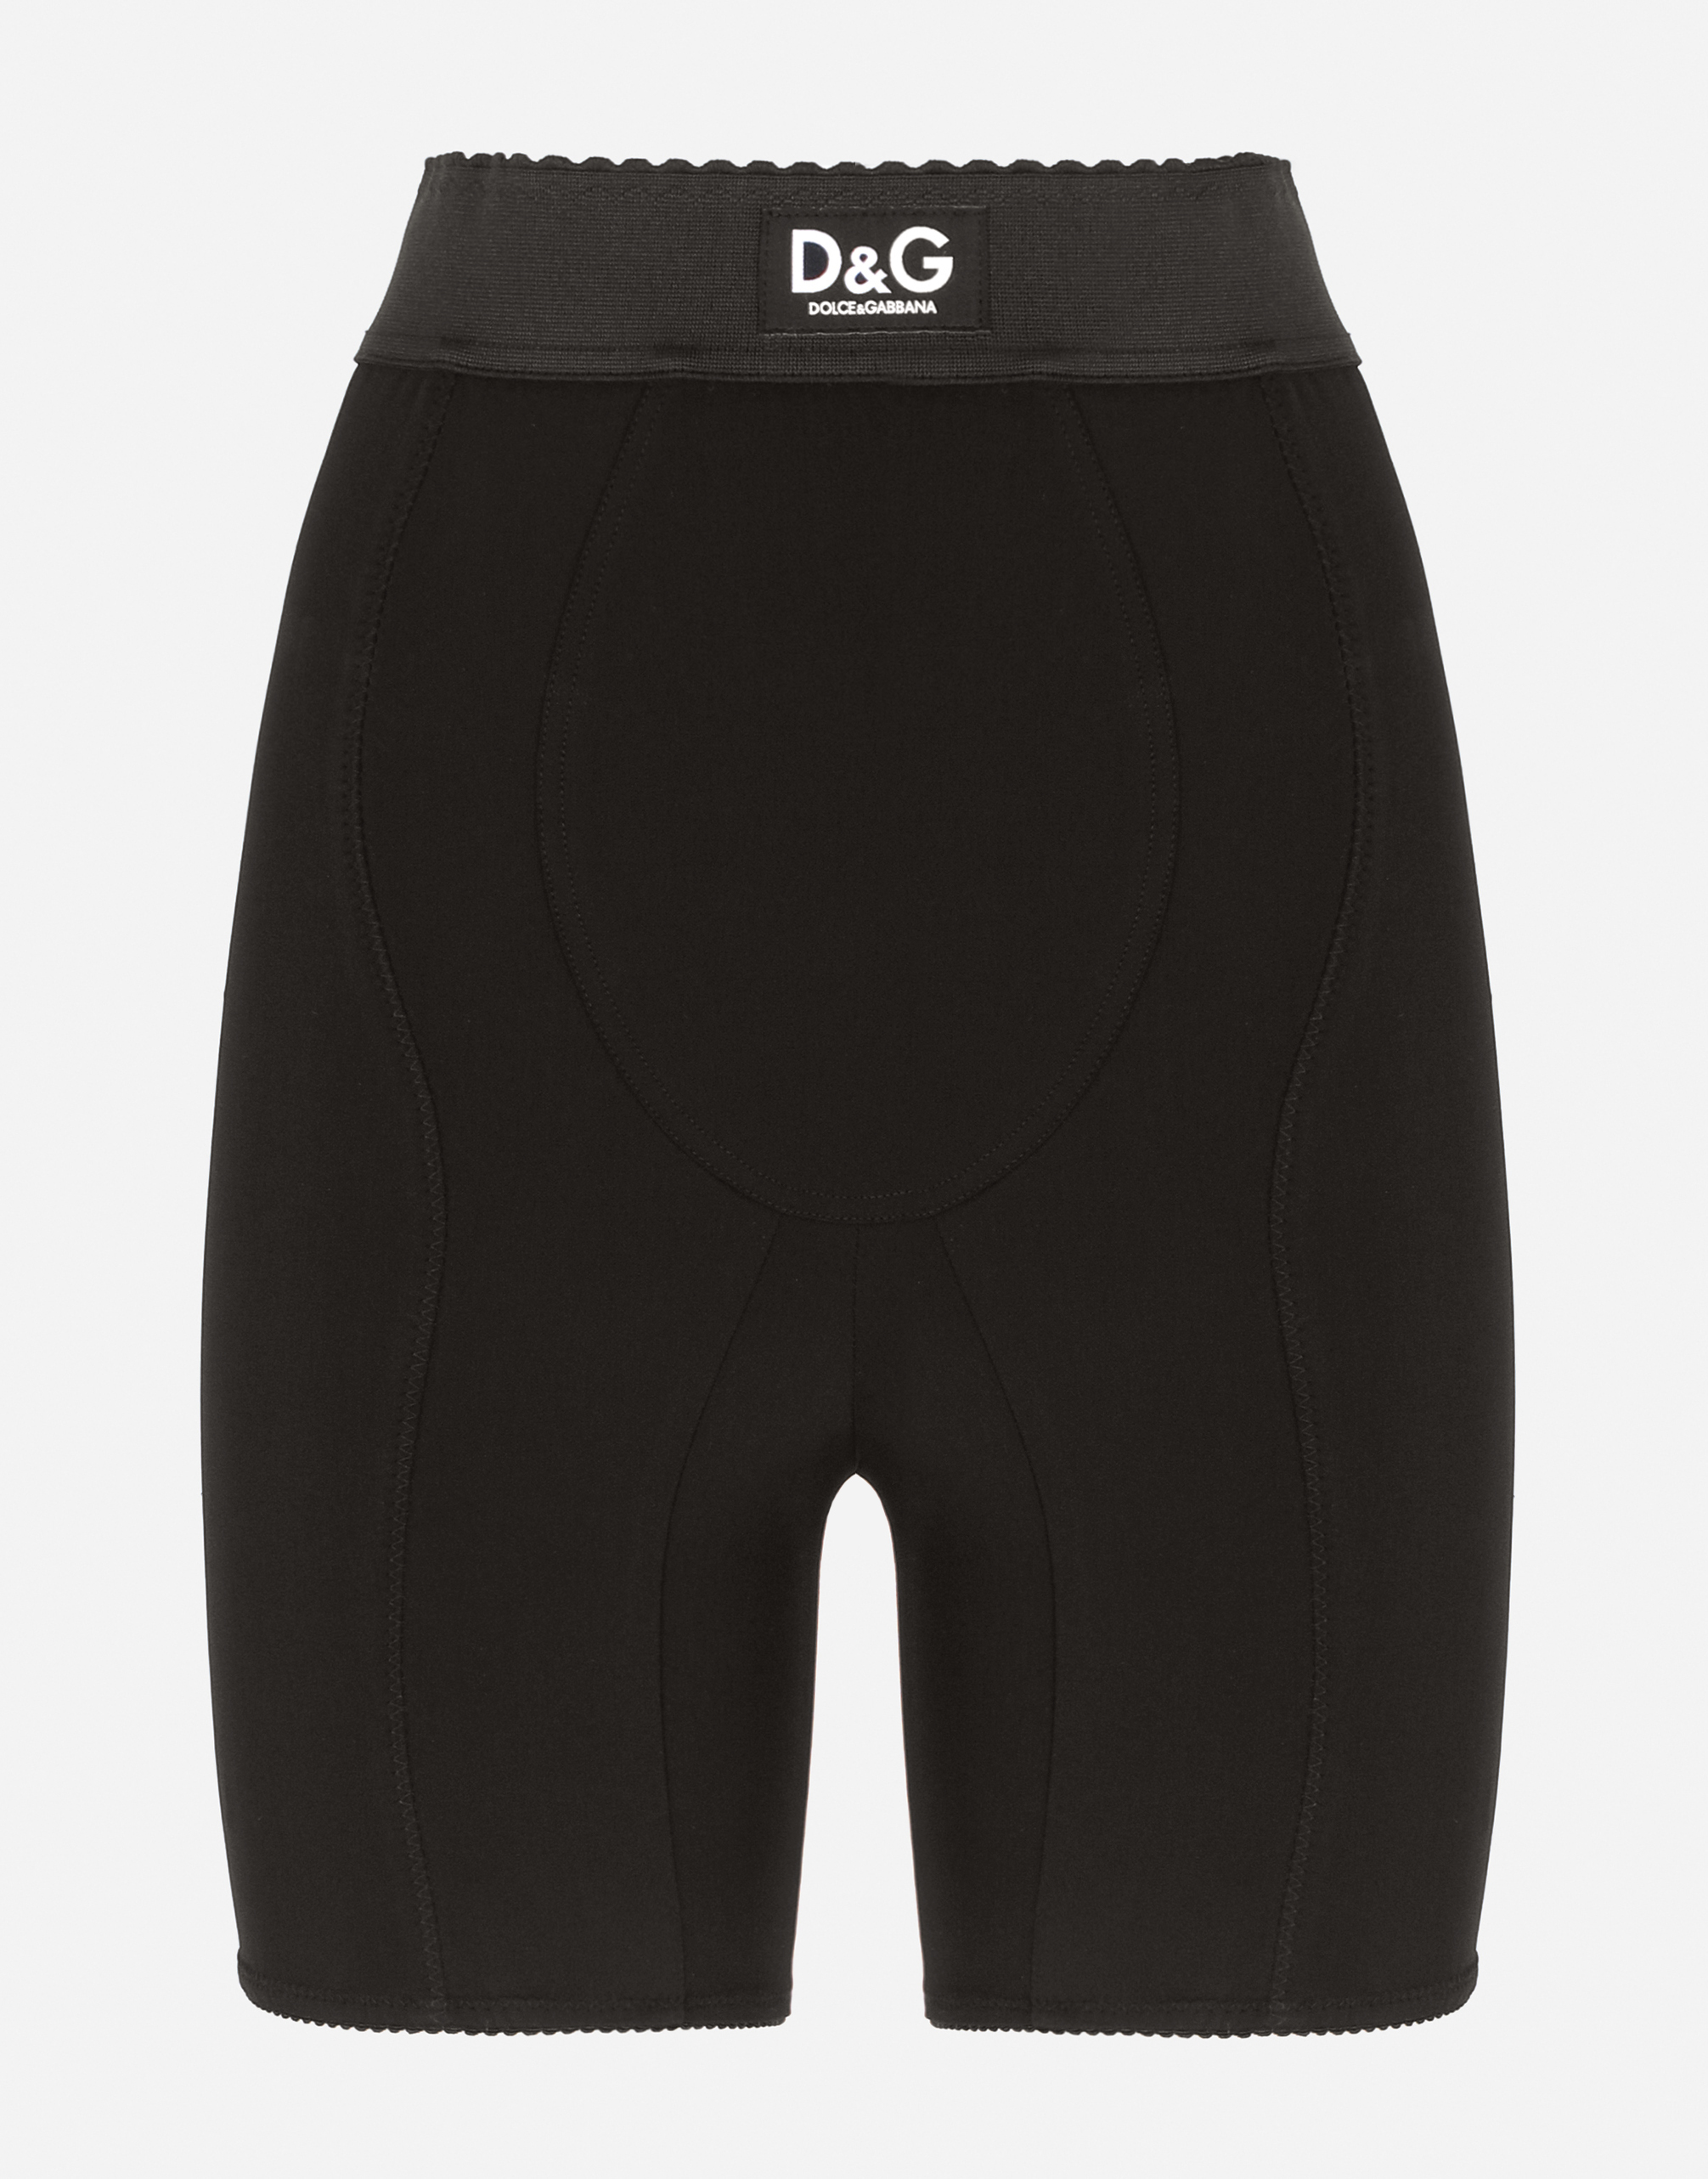 Jersey cycling shorts in Black